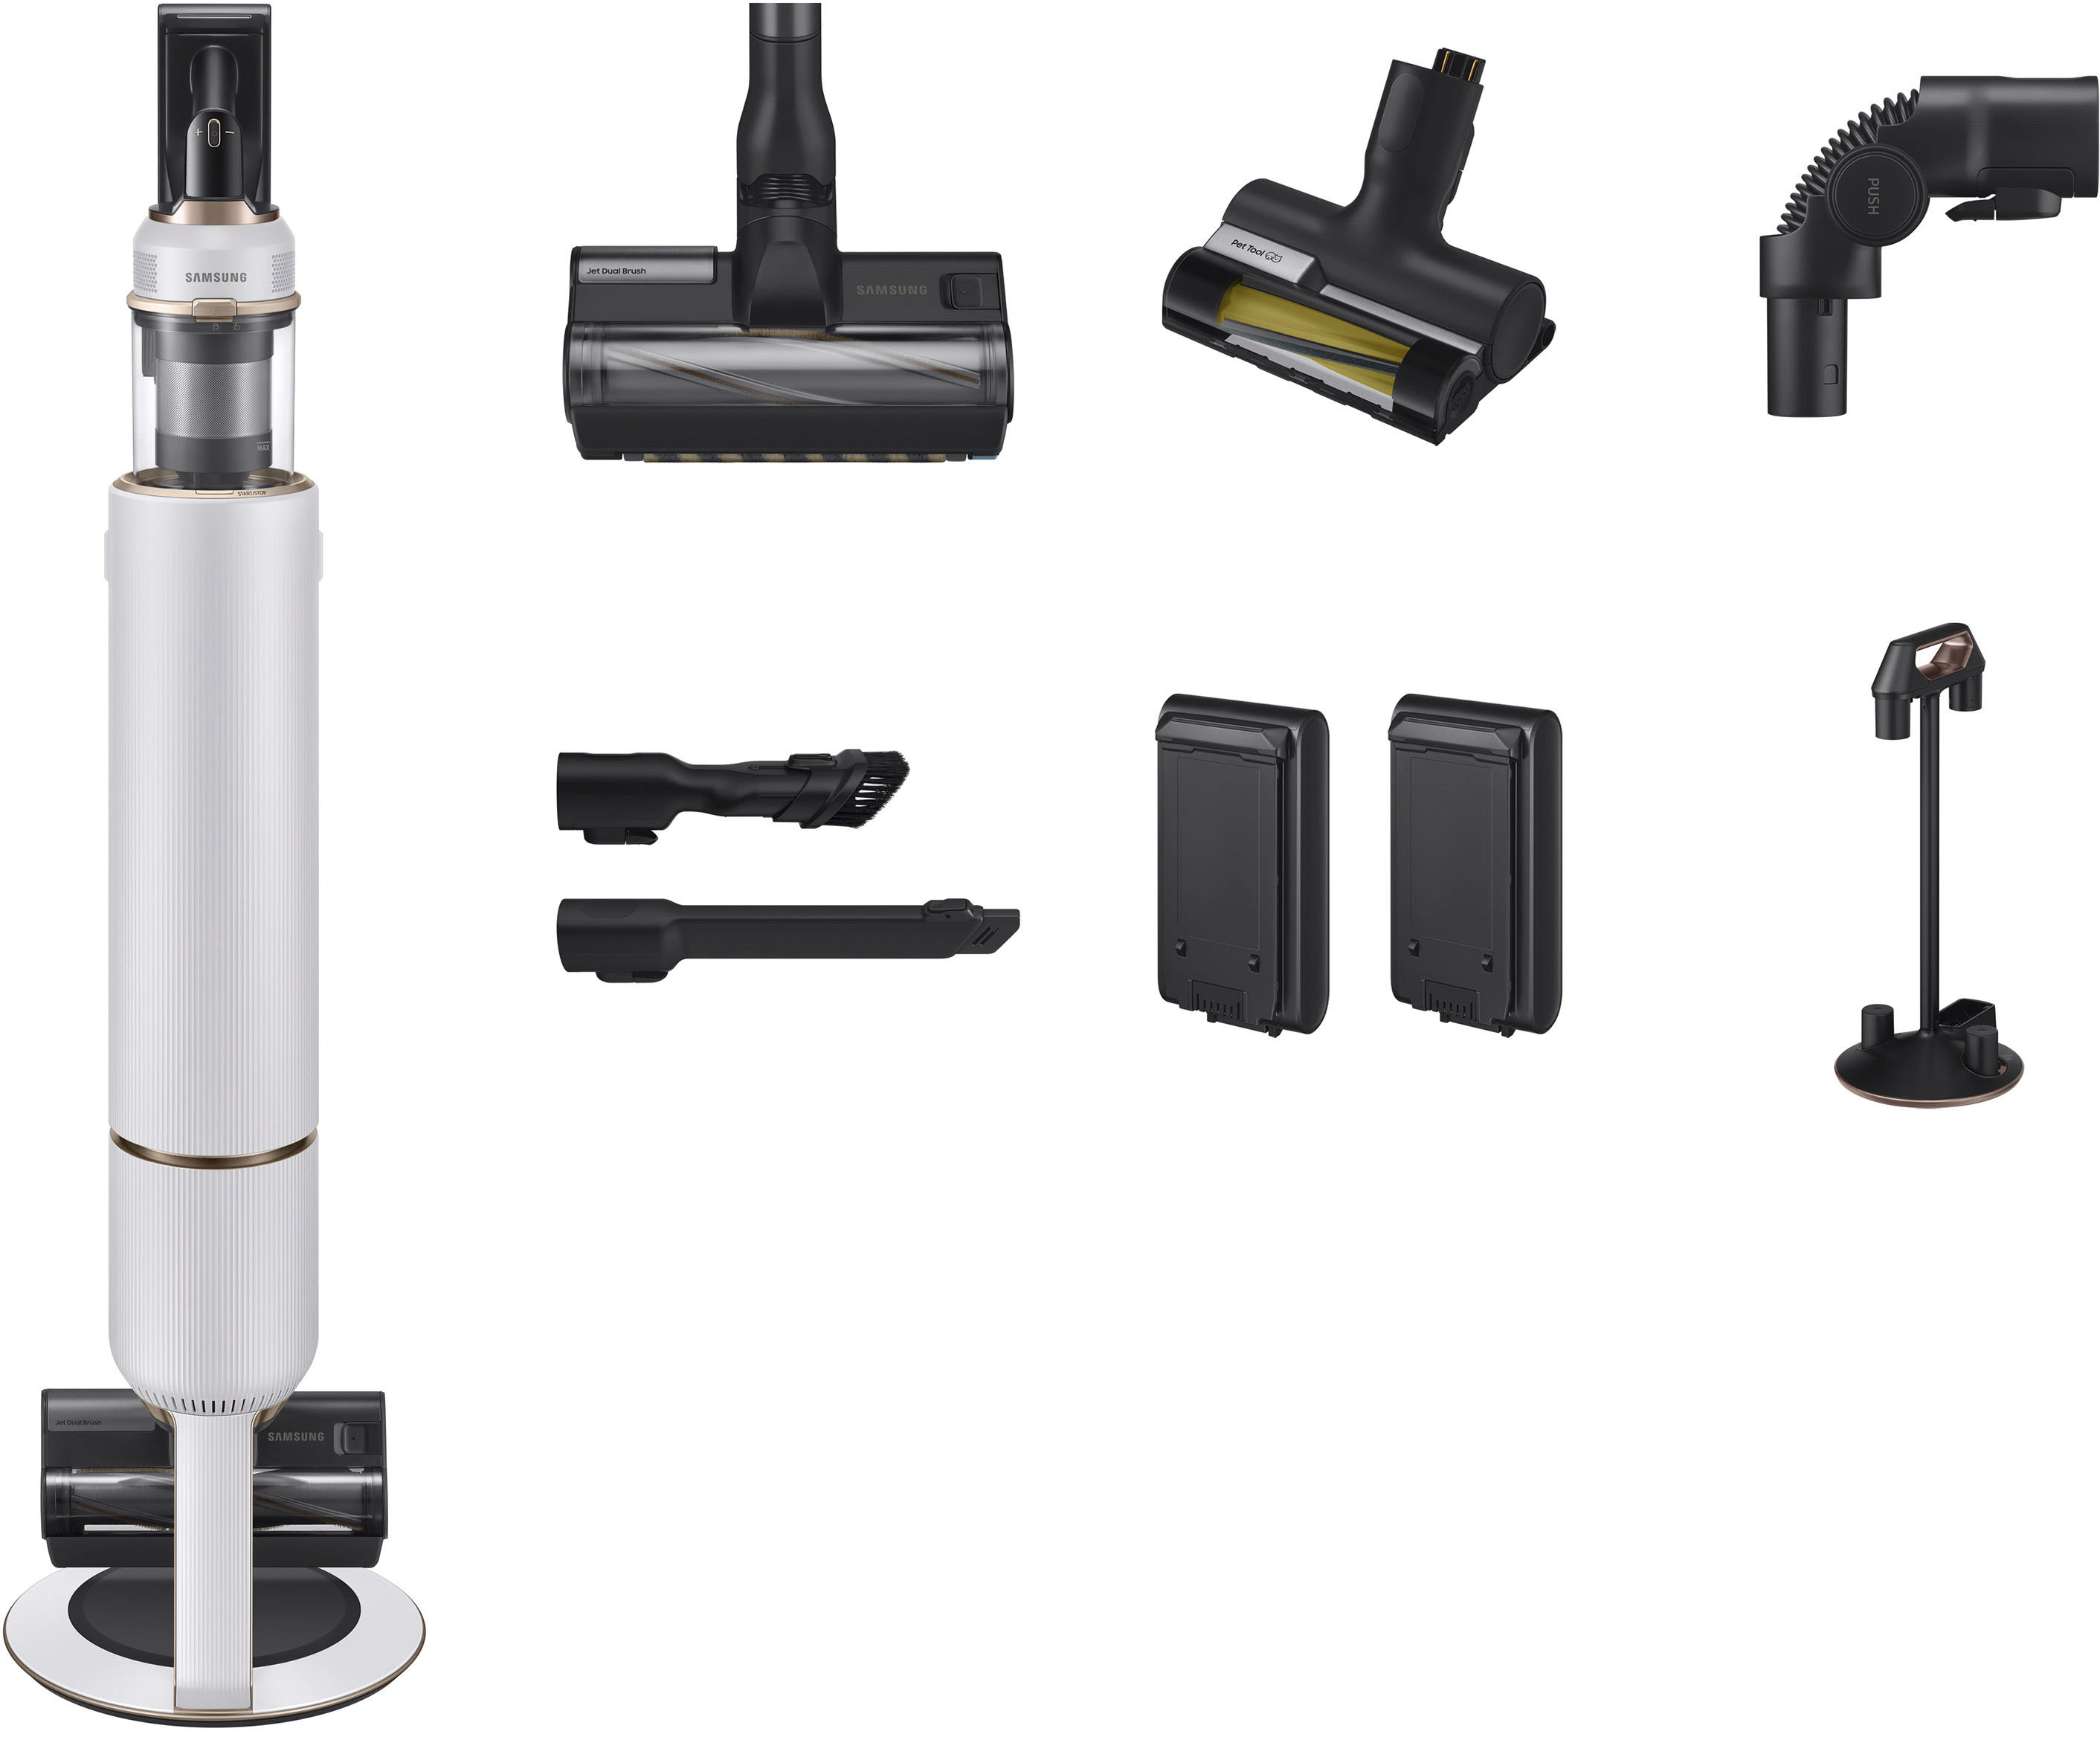 Best Buy: Samsung Bespoke Jet Cordless Stick Vacuum with All In